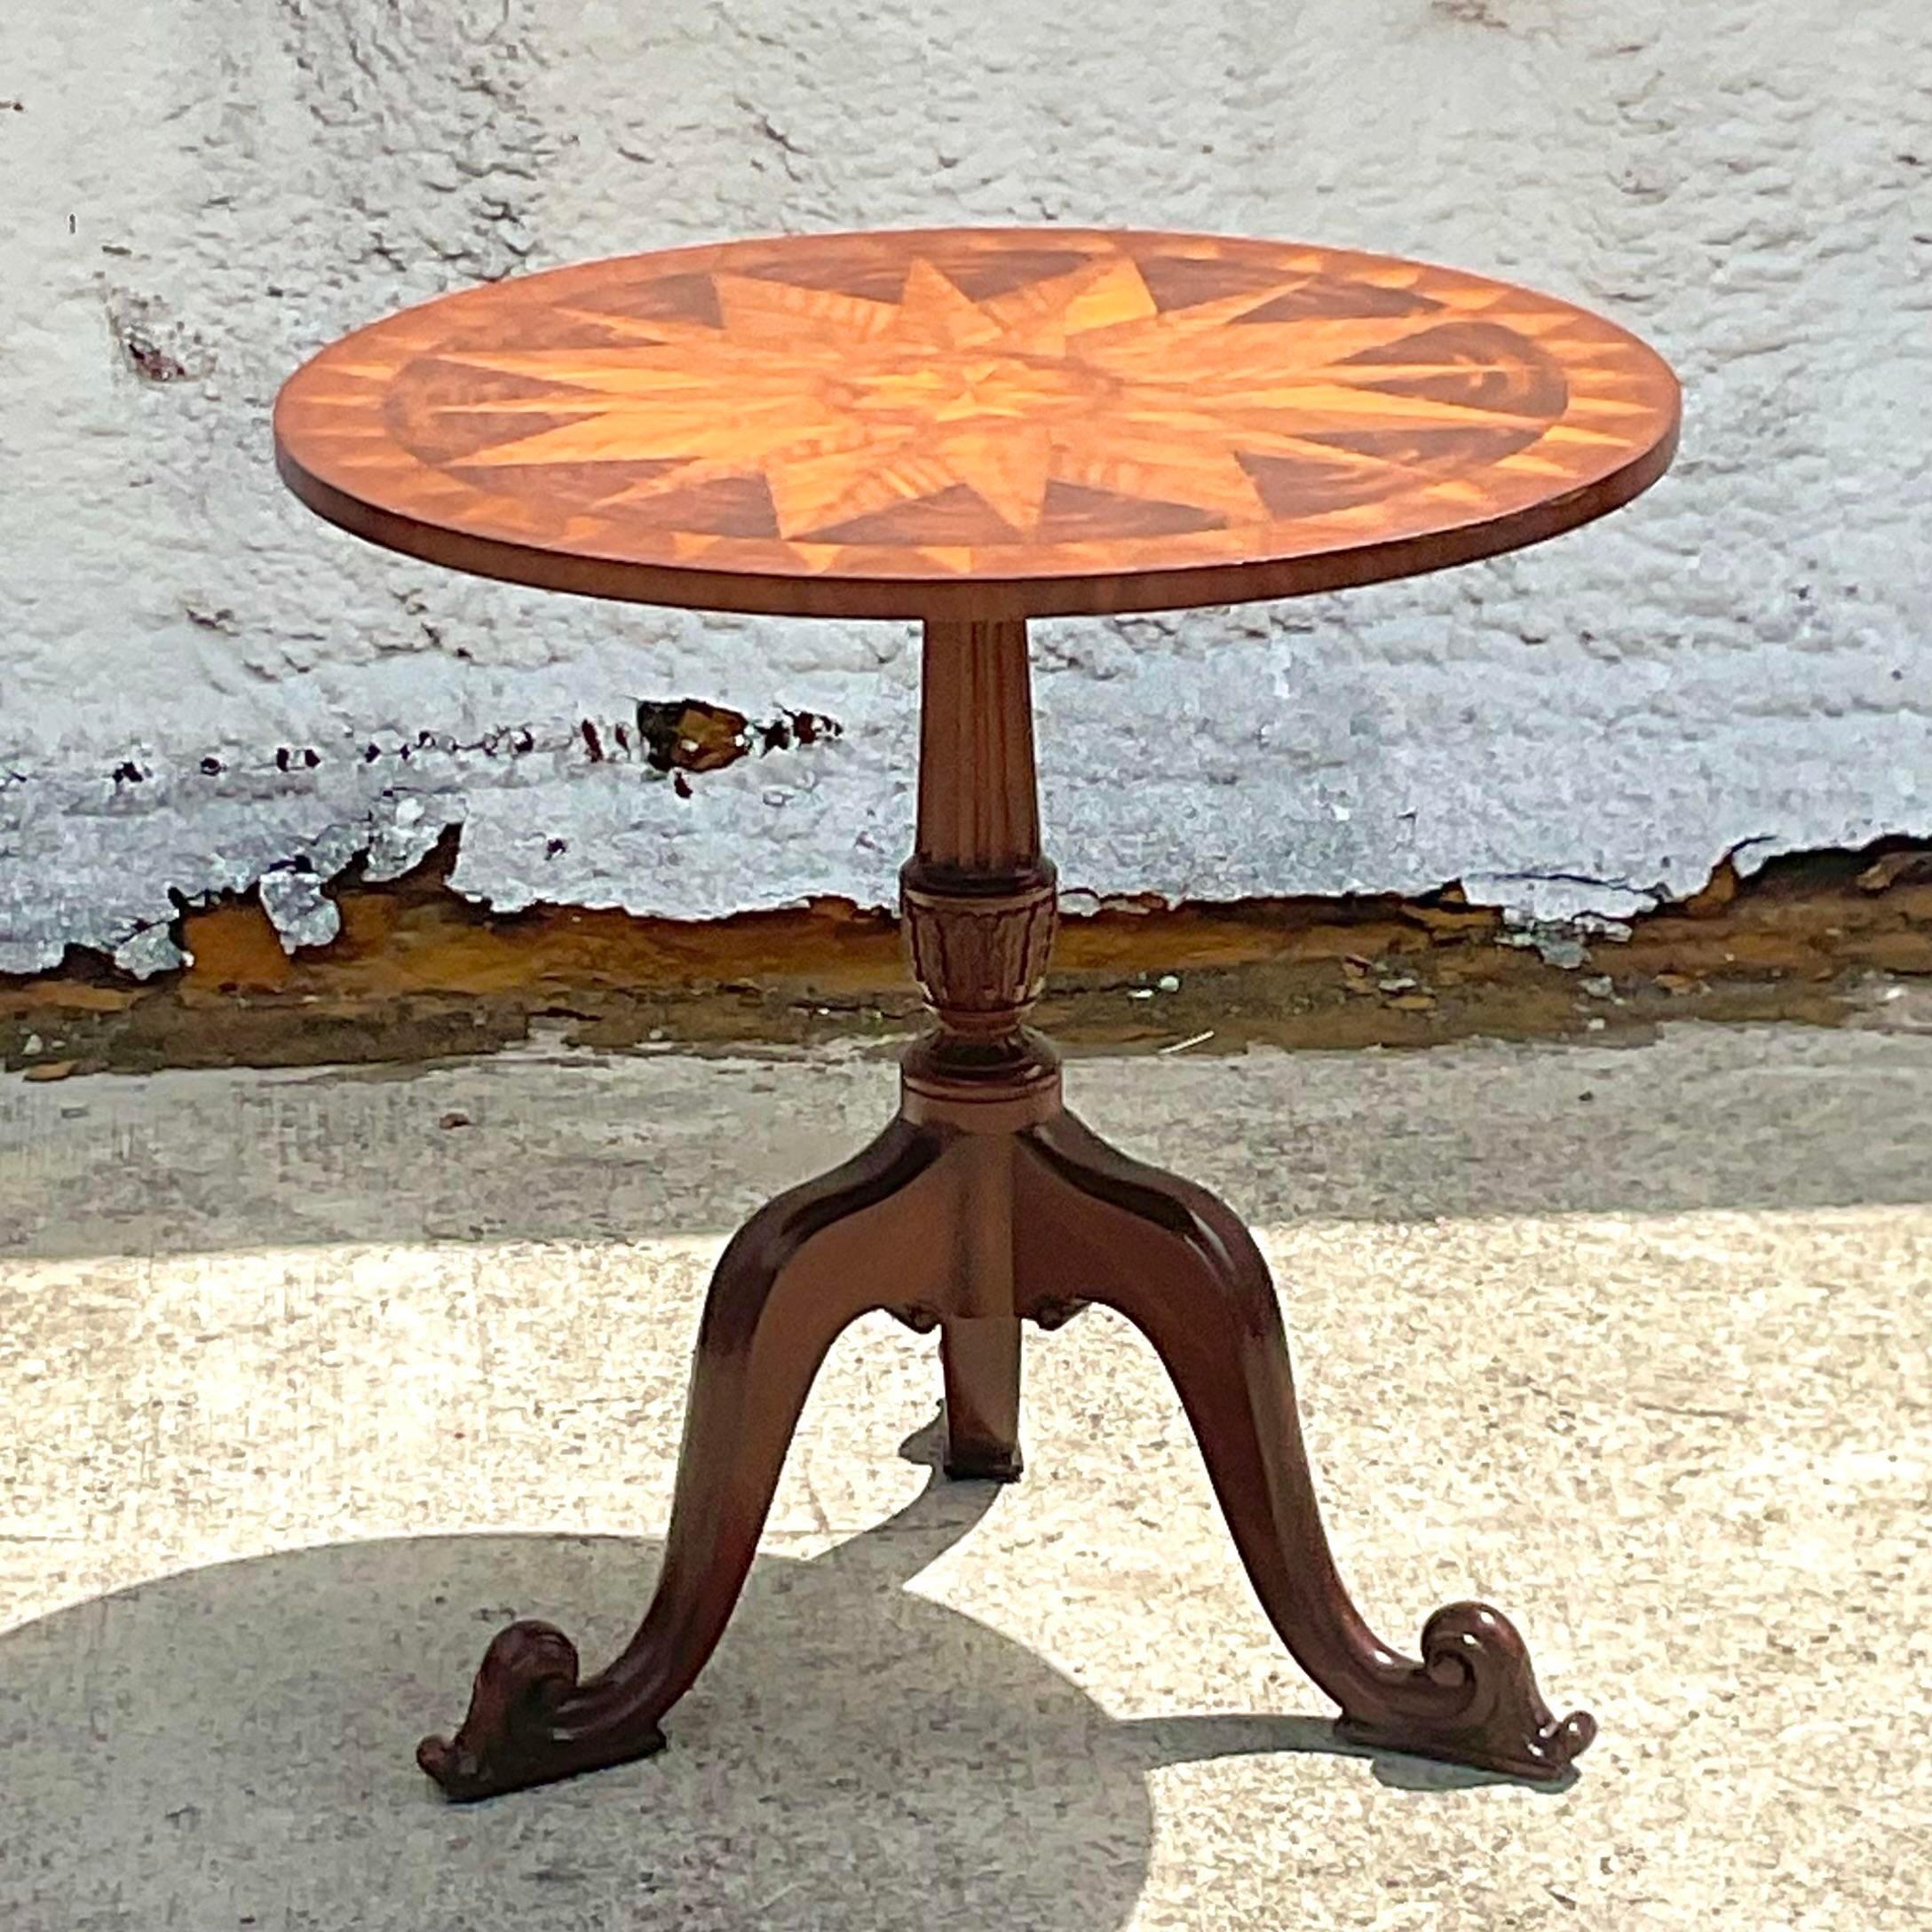 A stunning vintage Regency side table. Made by the iconic Maitland Smith group. Chic inlaid star pattern in the top. Signed on the bottom. Acquired from a Palm Beach estate.